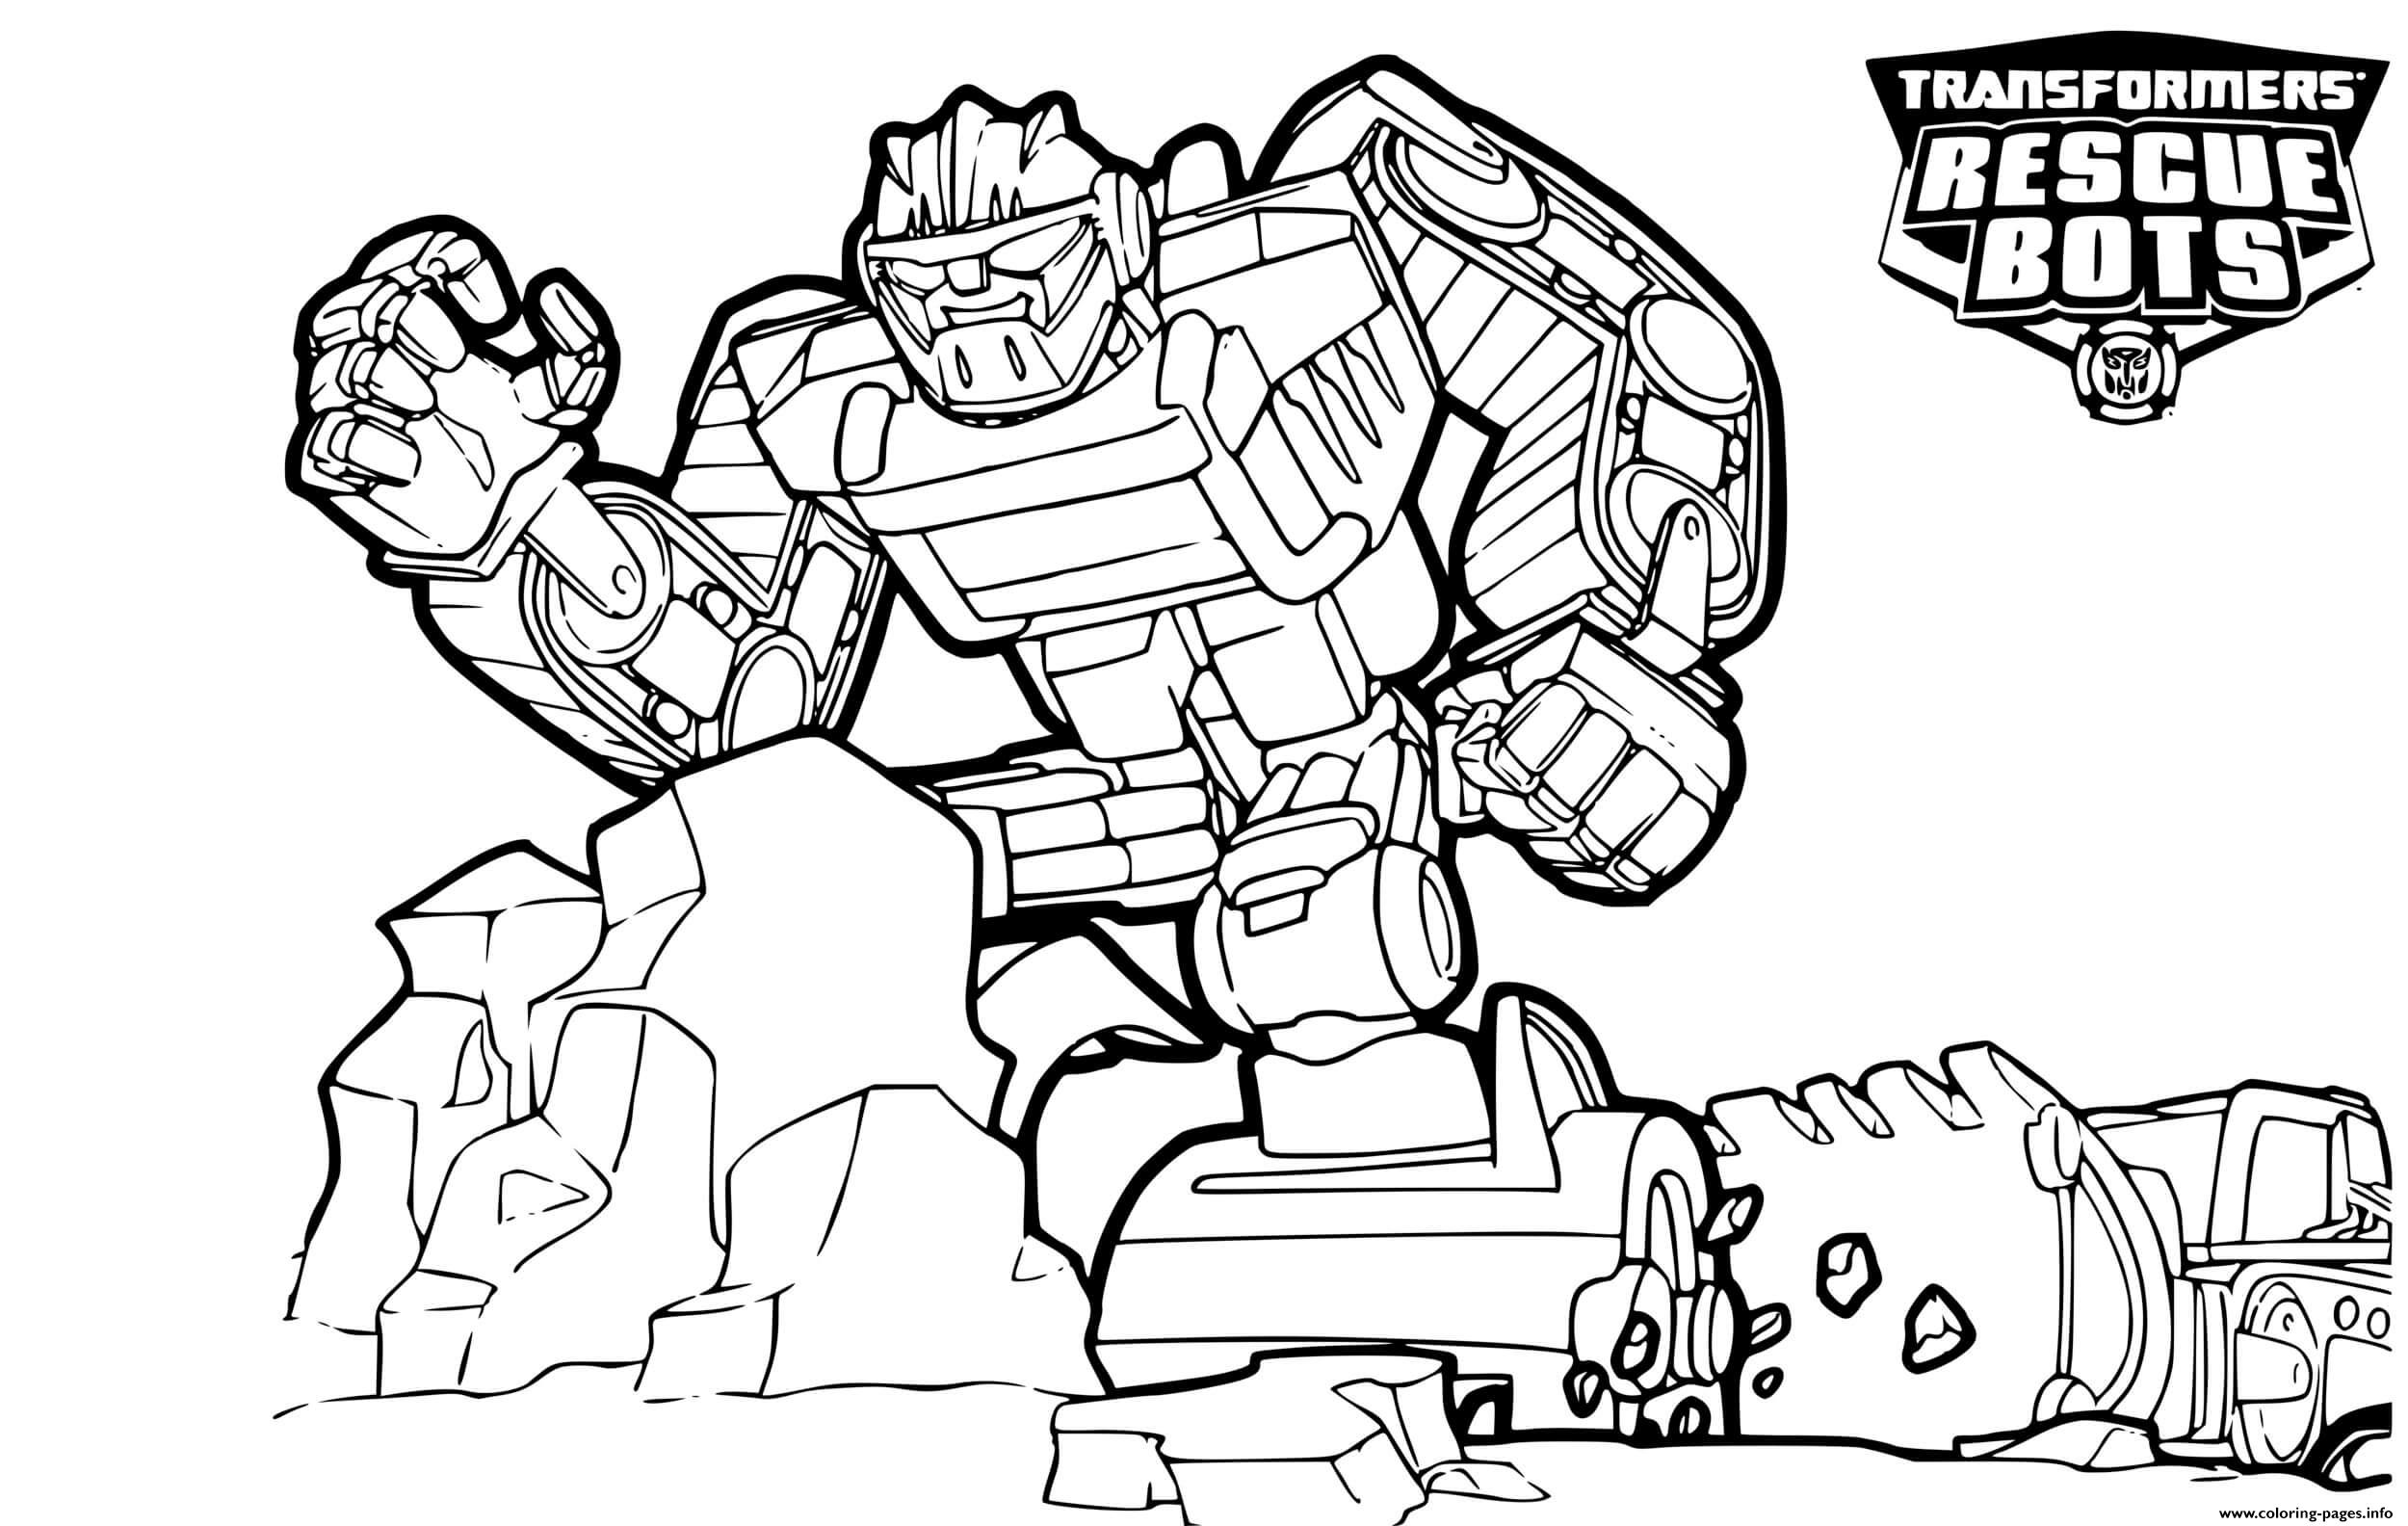 Transformers Rescue Bots Boulder Line Drawing Coloring page Printable